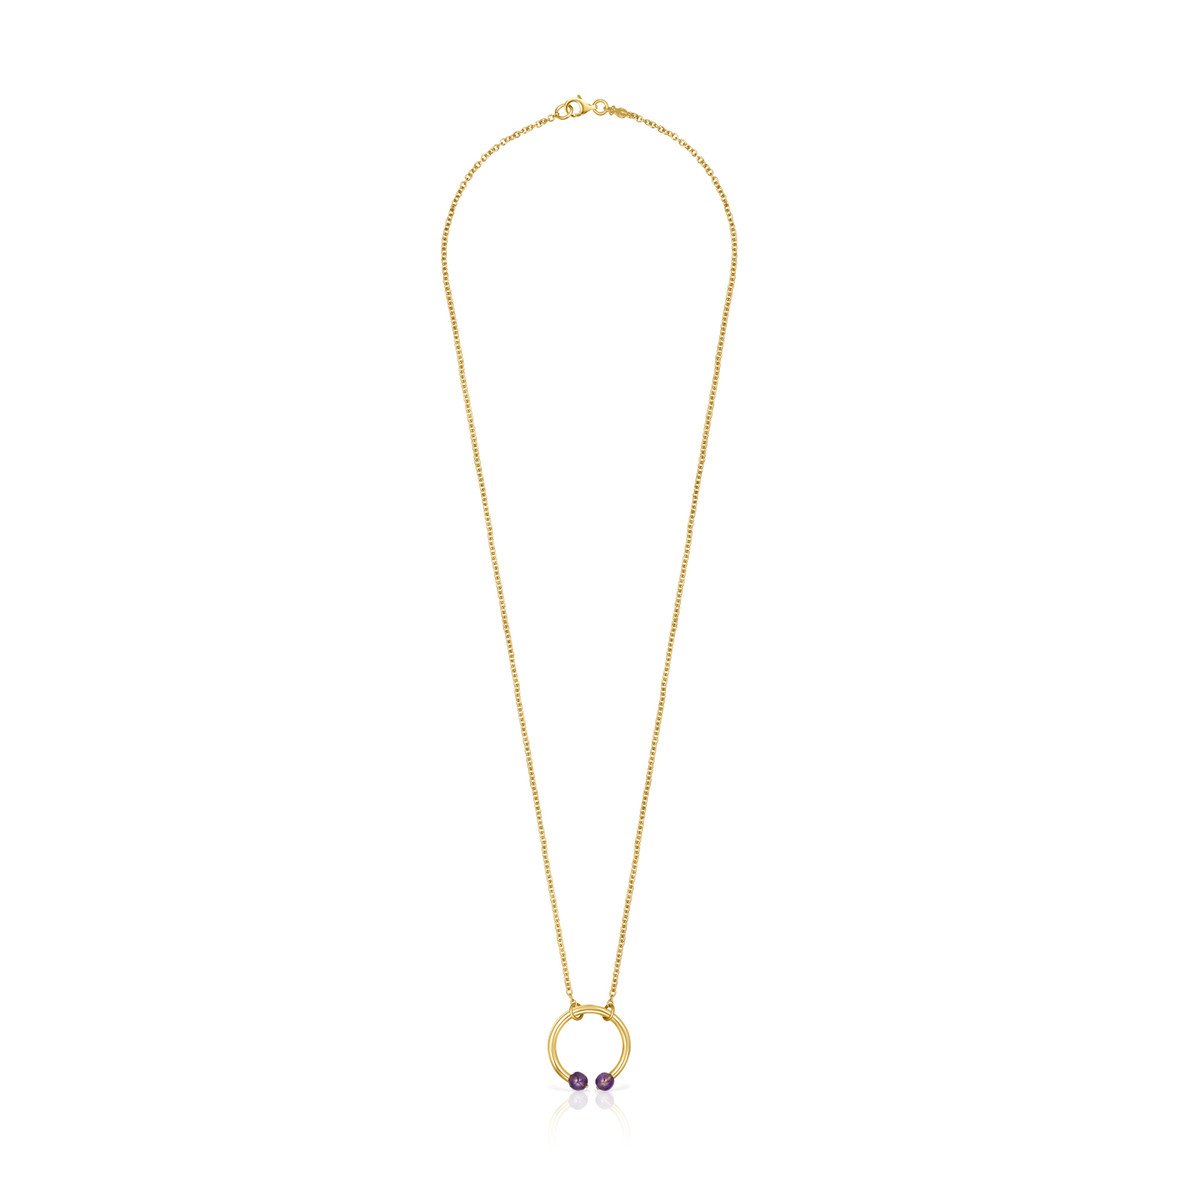 Tous Batala Necklace in Gold Vermeil with Amethyst 918542590